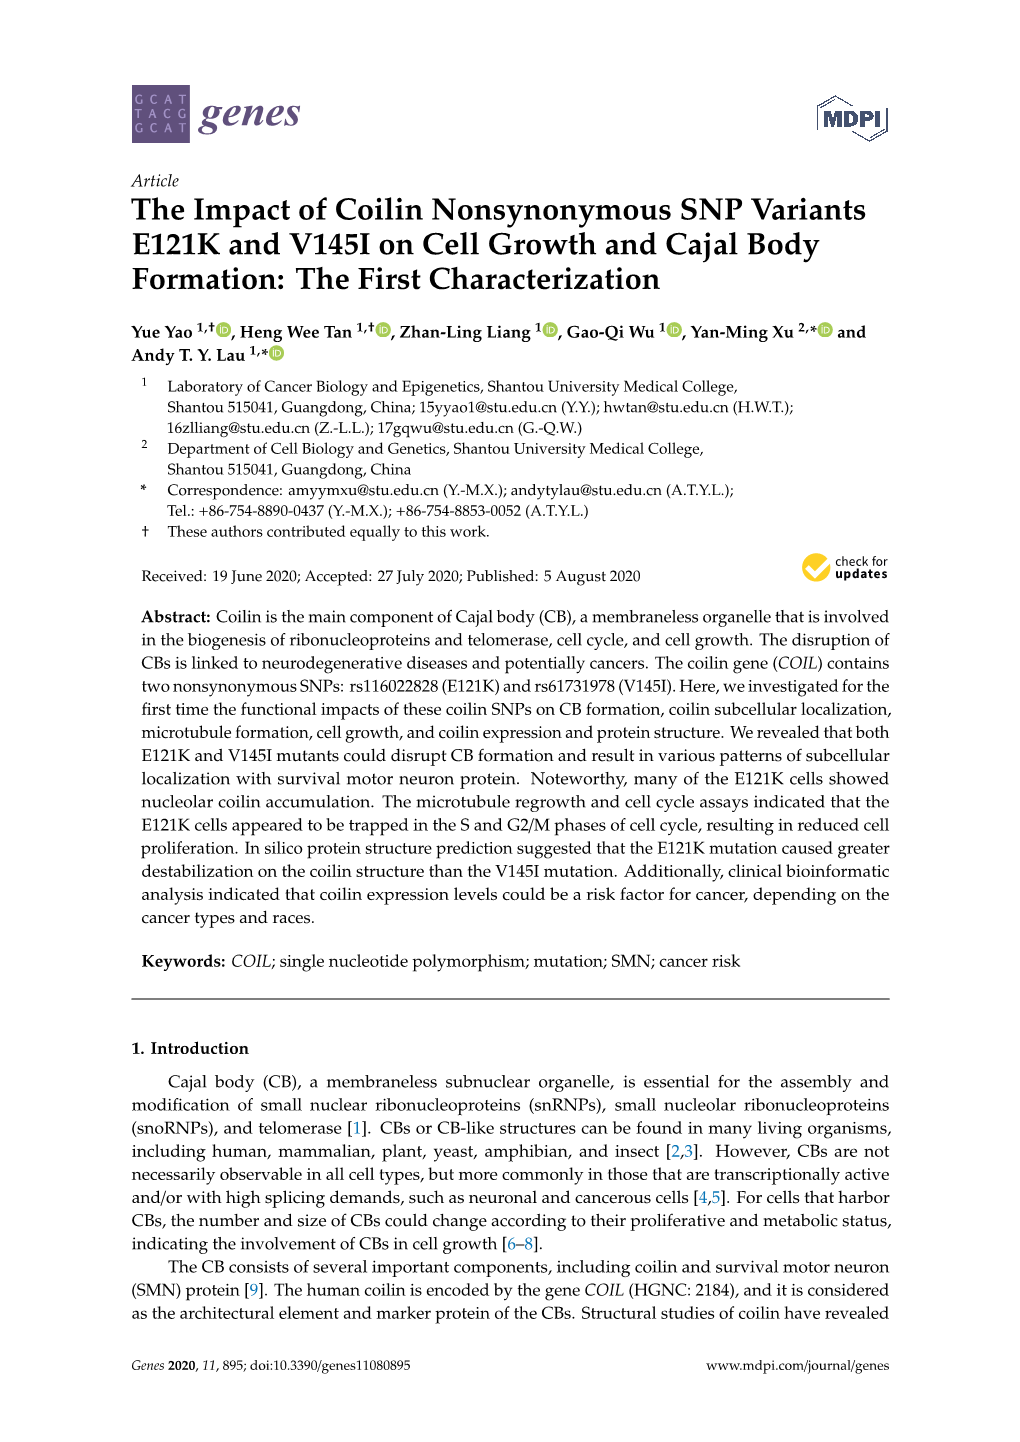 The Impact of Coilin Nonsynonymous SNP Variants E121K and V145I on Cell Growth and Cajal Body Formation: the First Characterization